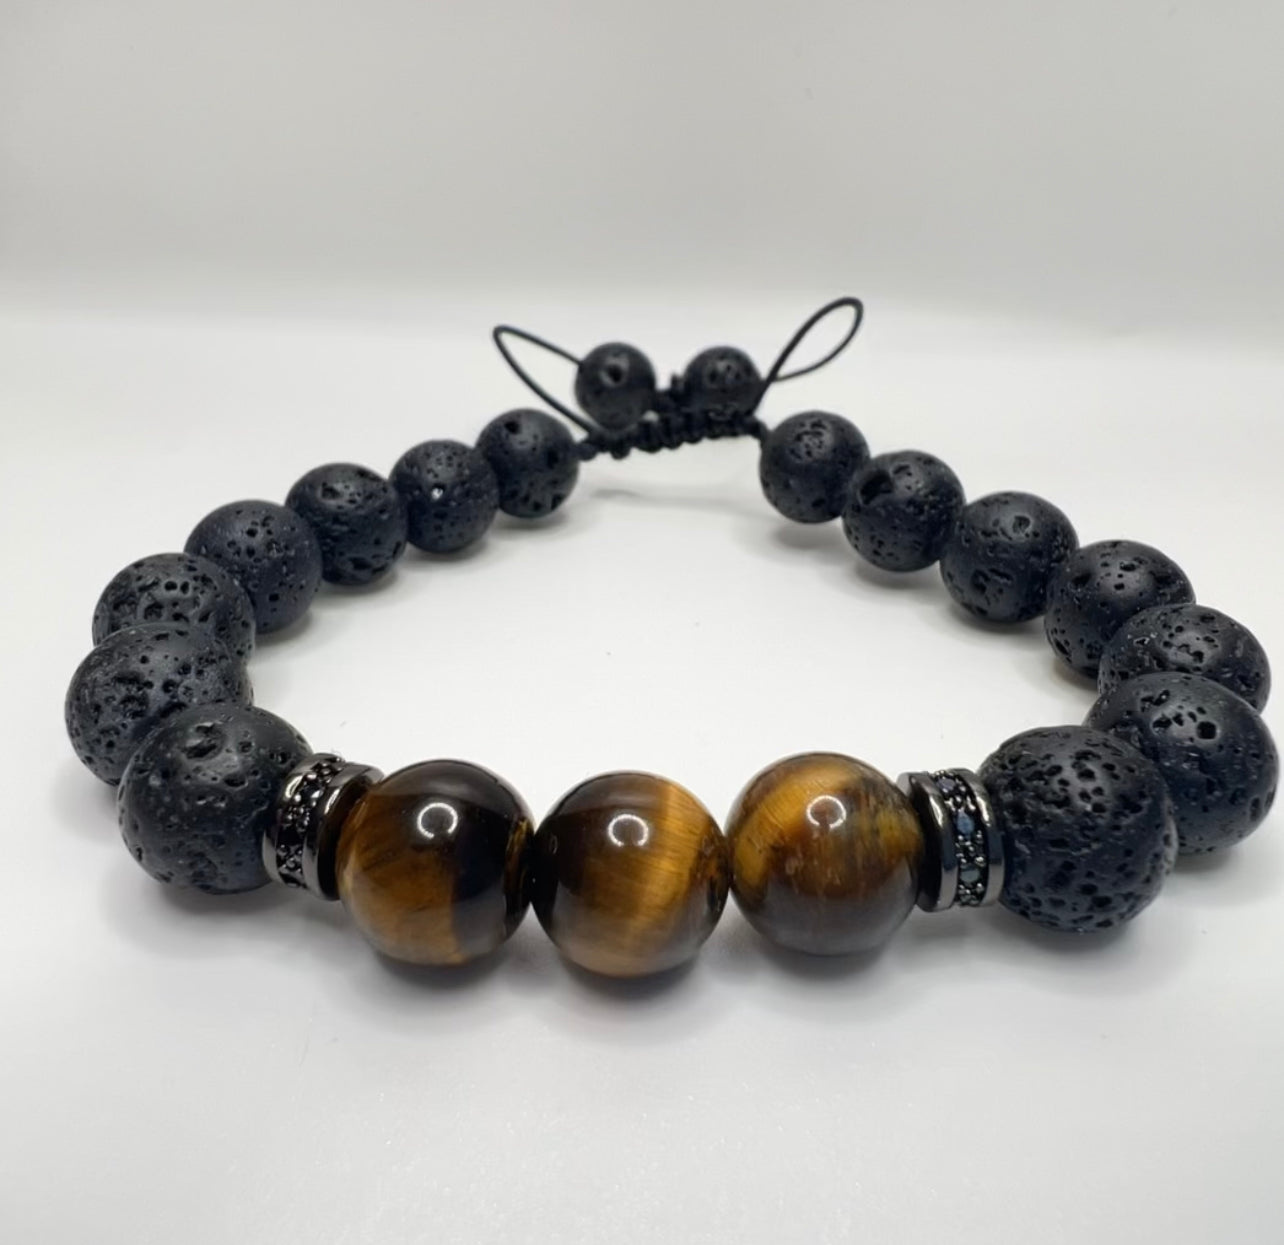 Tiger's Eye:brings protection against negative energy and strengthens self-worth   lava: strengthens one's connection to Mother Earth bracelet .2